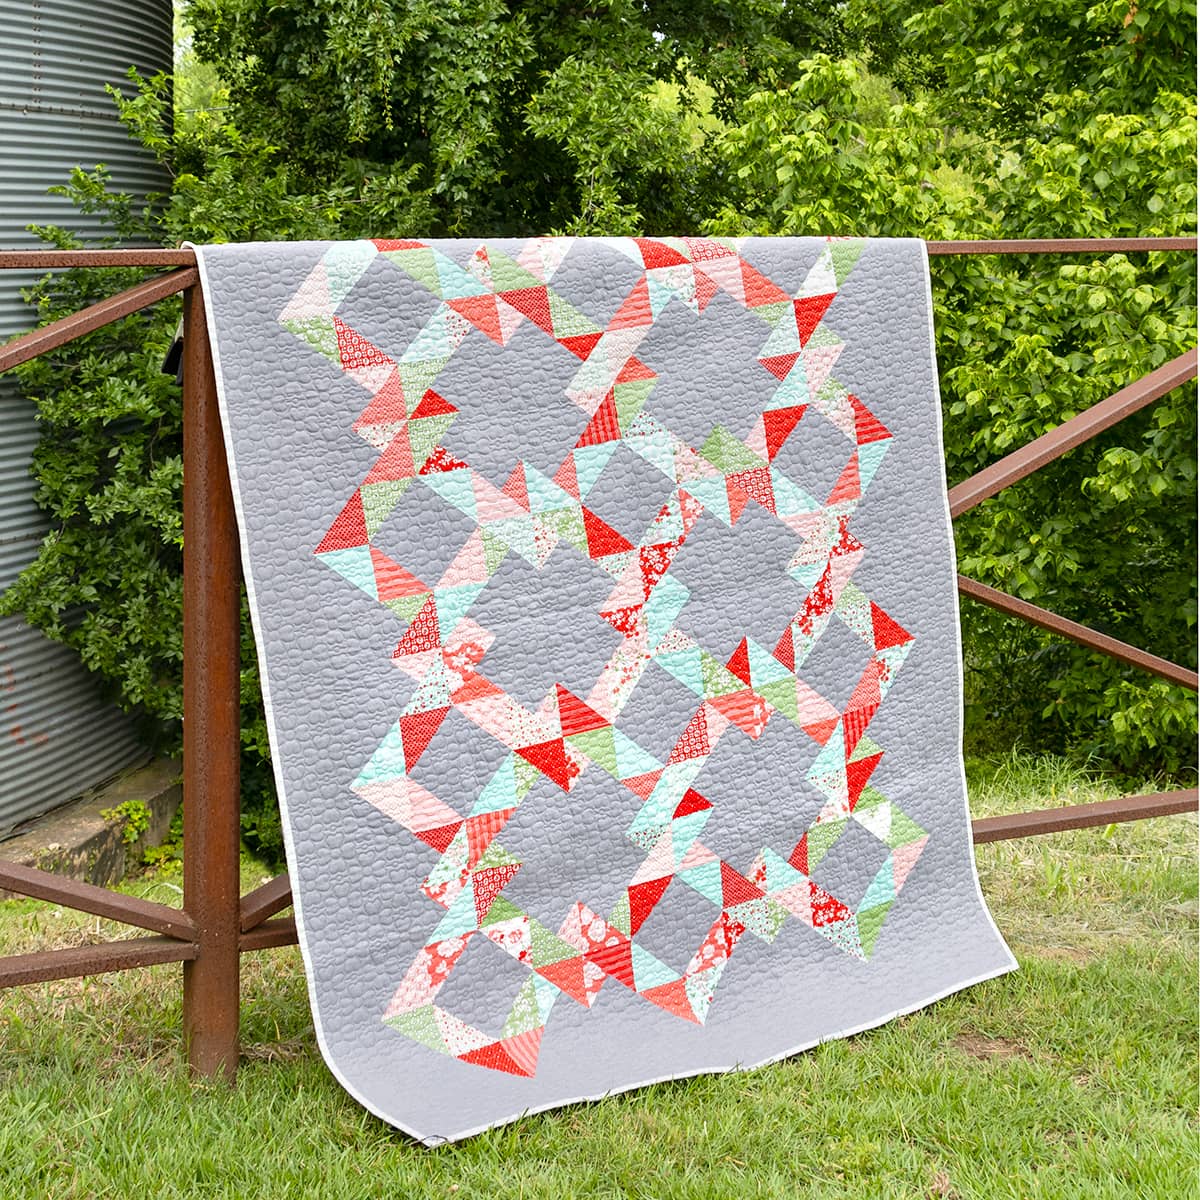 2023 Free Quilt Block Challenge - Diary of a Quilter - a quilt blog